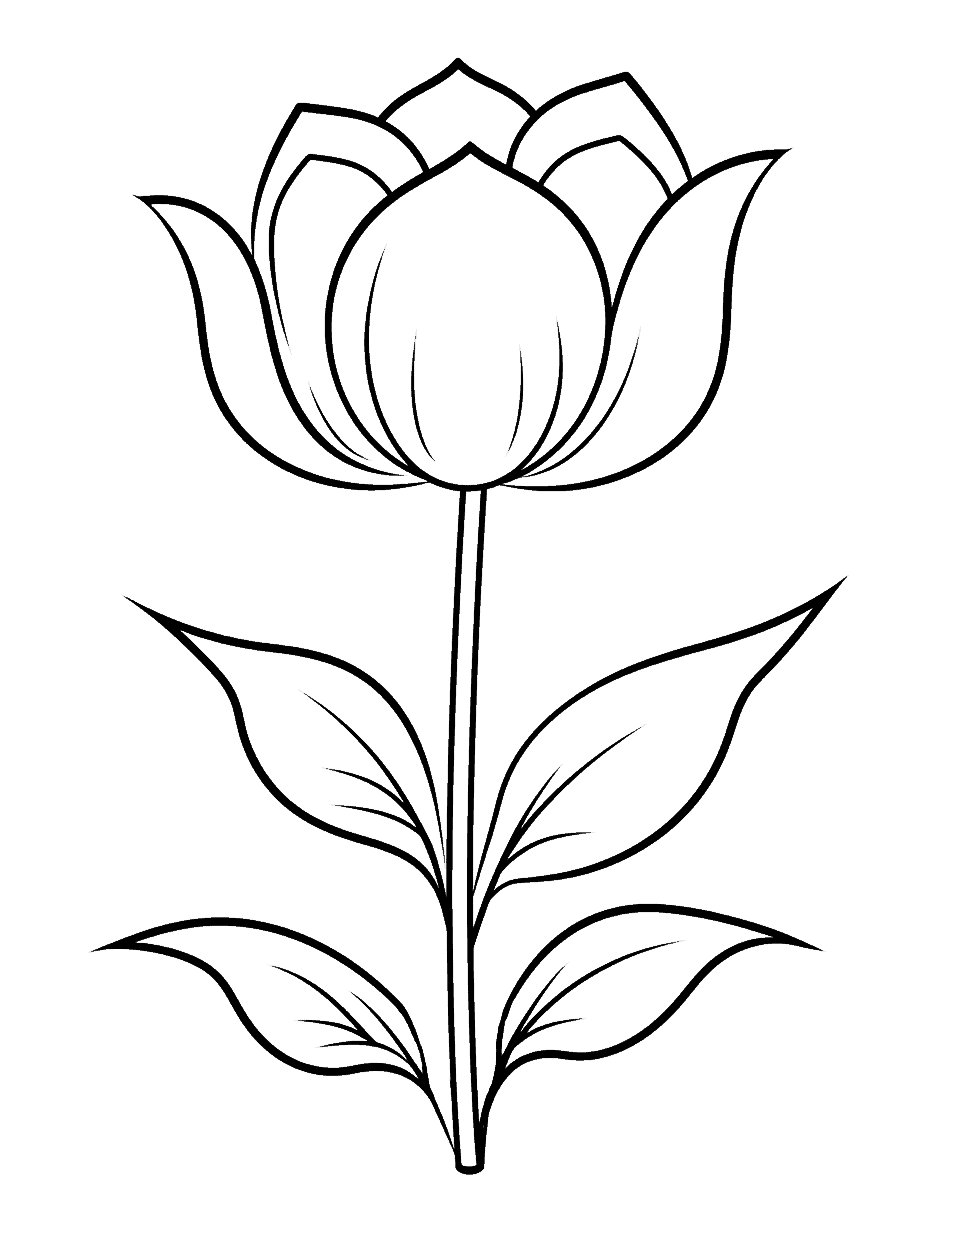 How to Draw Wildflowers - Step by Step Easy Drawing Guides - Drawing Howtos-saigonsouth.com.vn